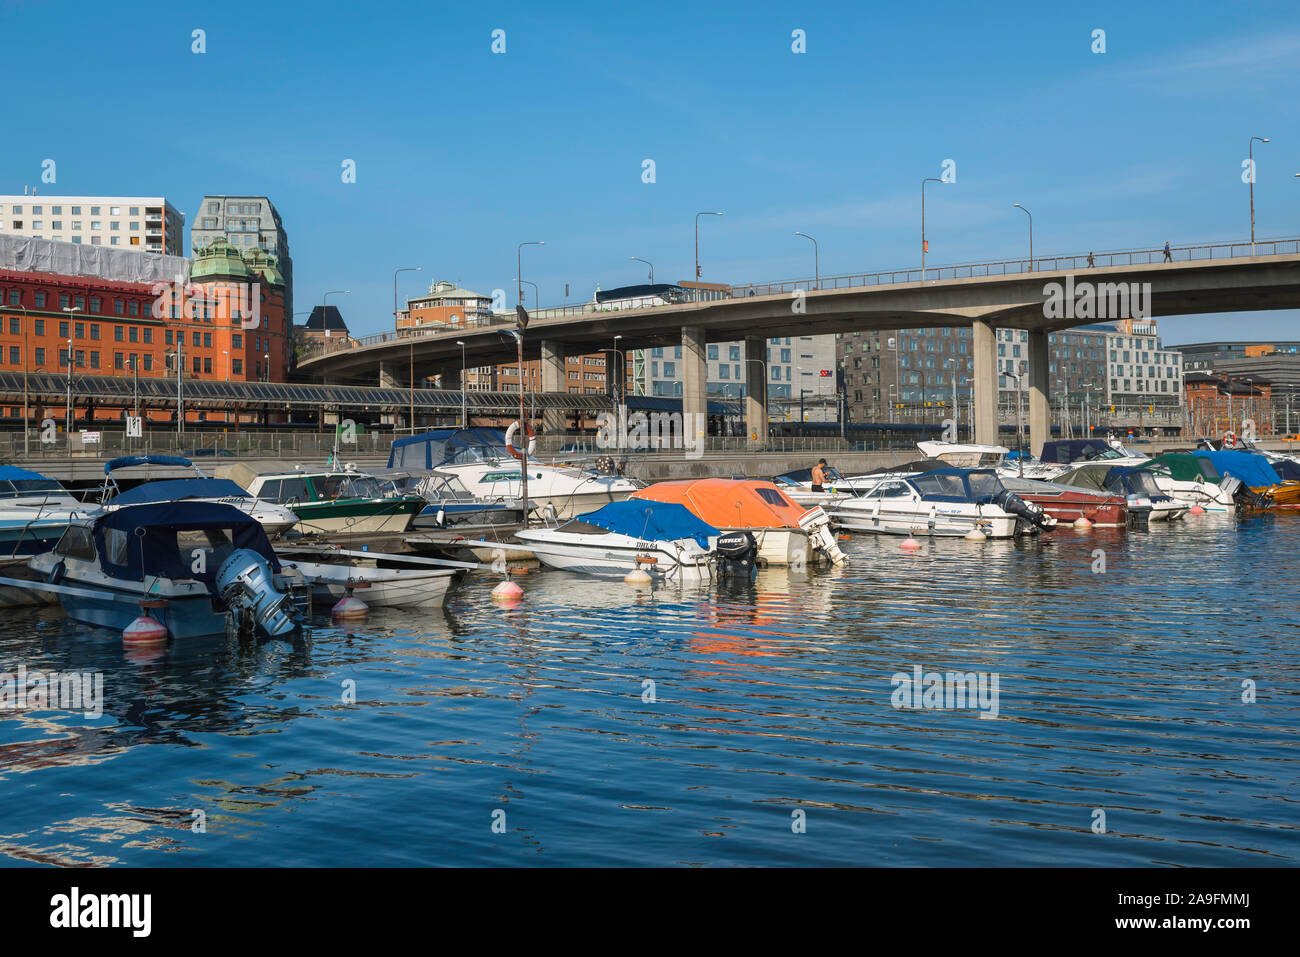 Stockholm river canal, view of boats moored in Klara Sjö, a narrow river separating the Kungsholmen and Norrmalm districts of Stockholm, Sweden. Stock Photo